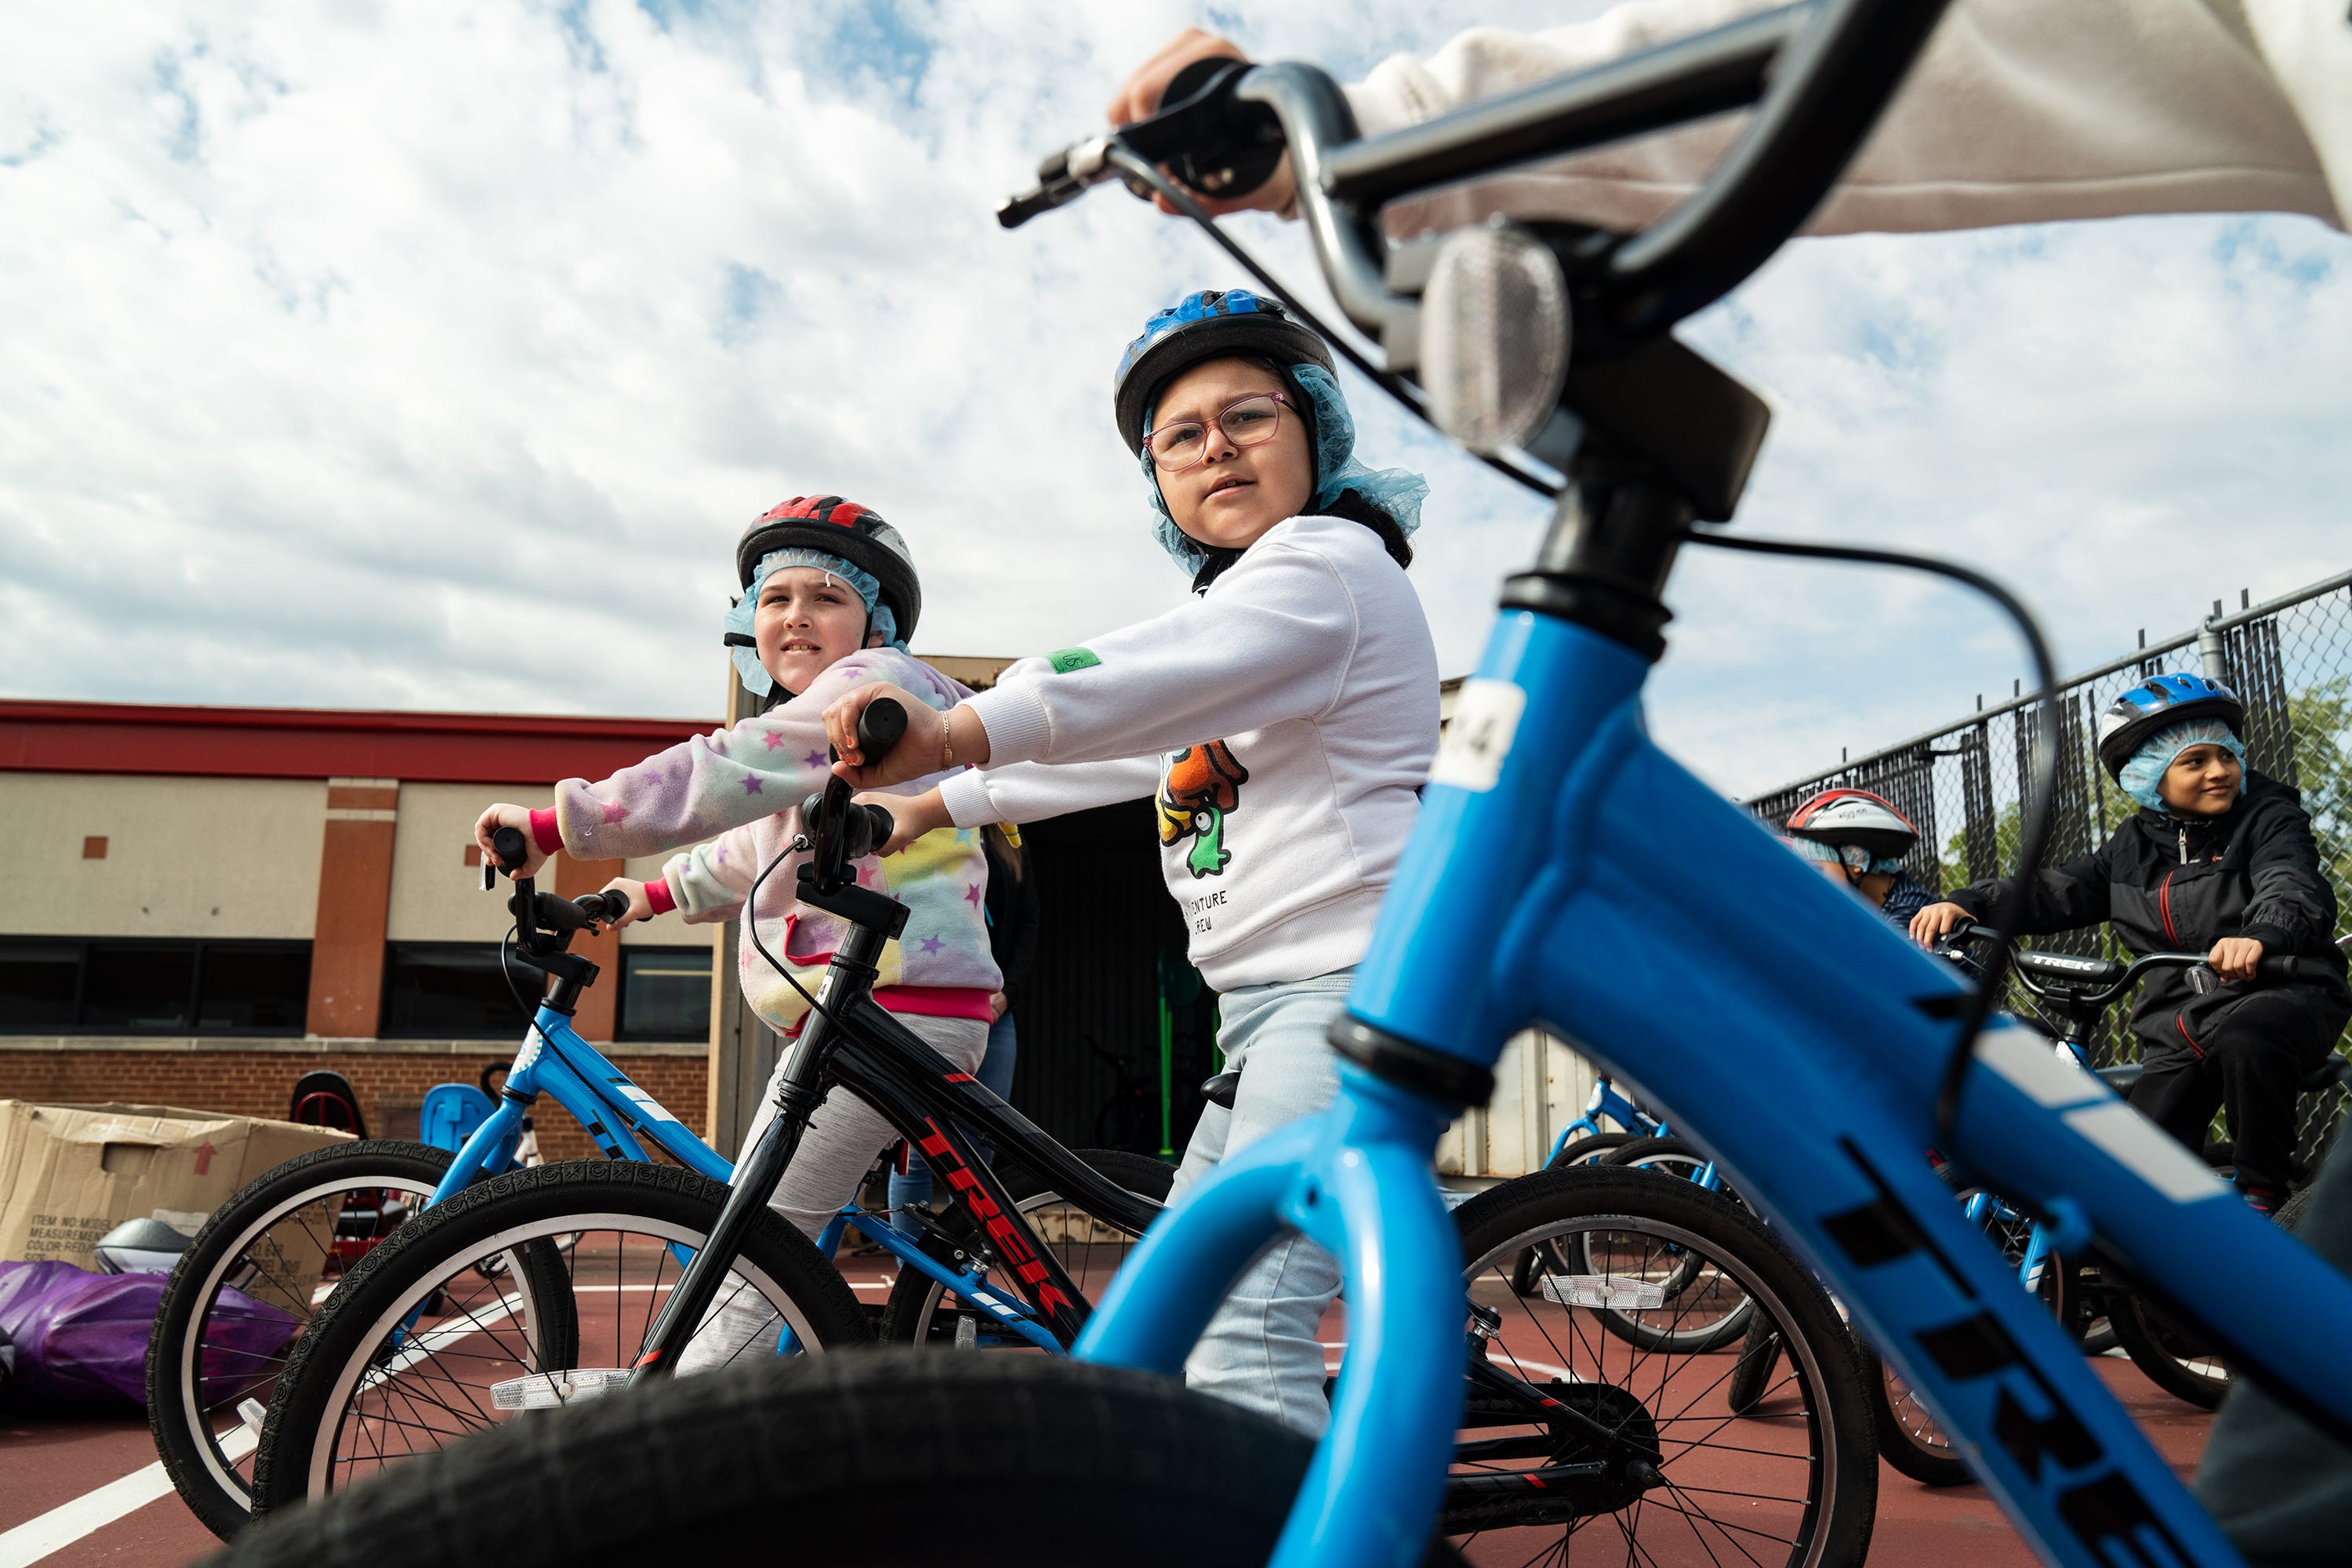 Ashley Soto, a third grader at Cora Kelly School in Alexandria, Va., listens to instructions with her classmates as they learn how to ride bikes during physical education.